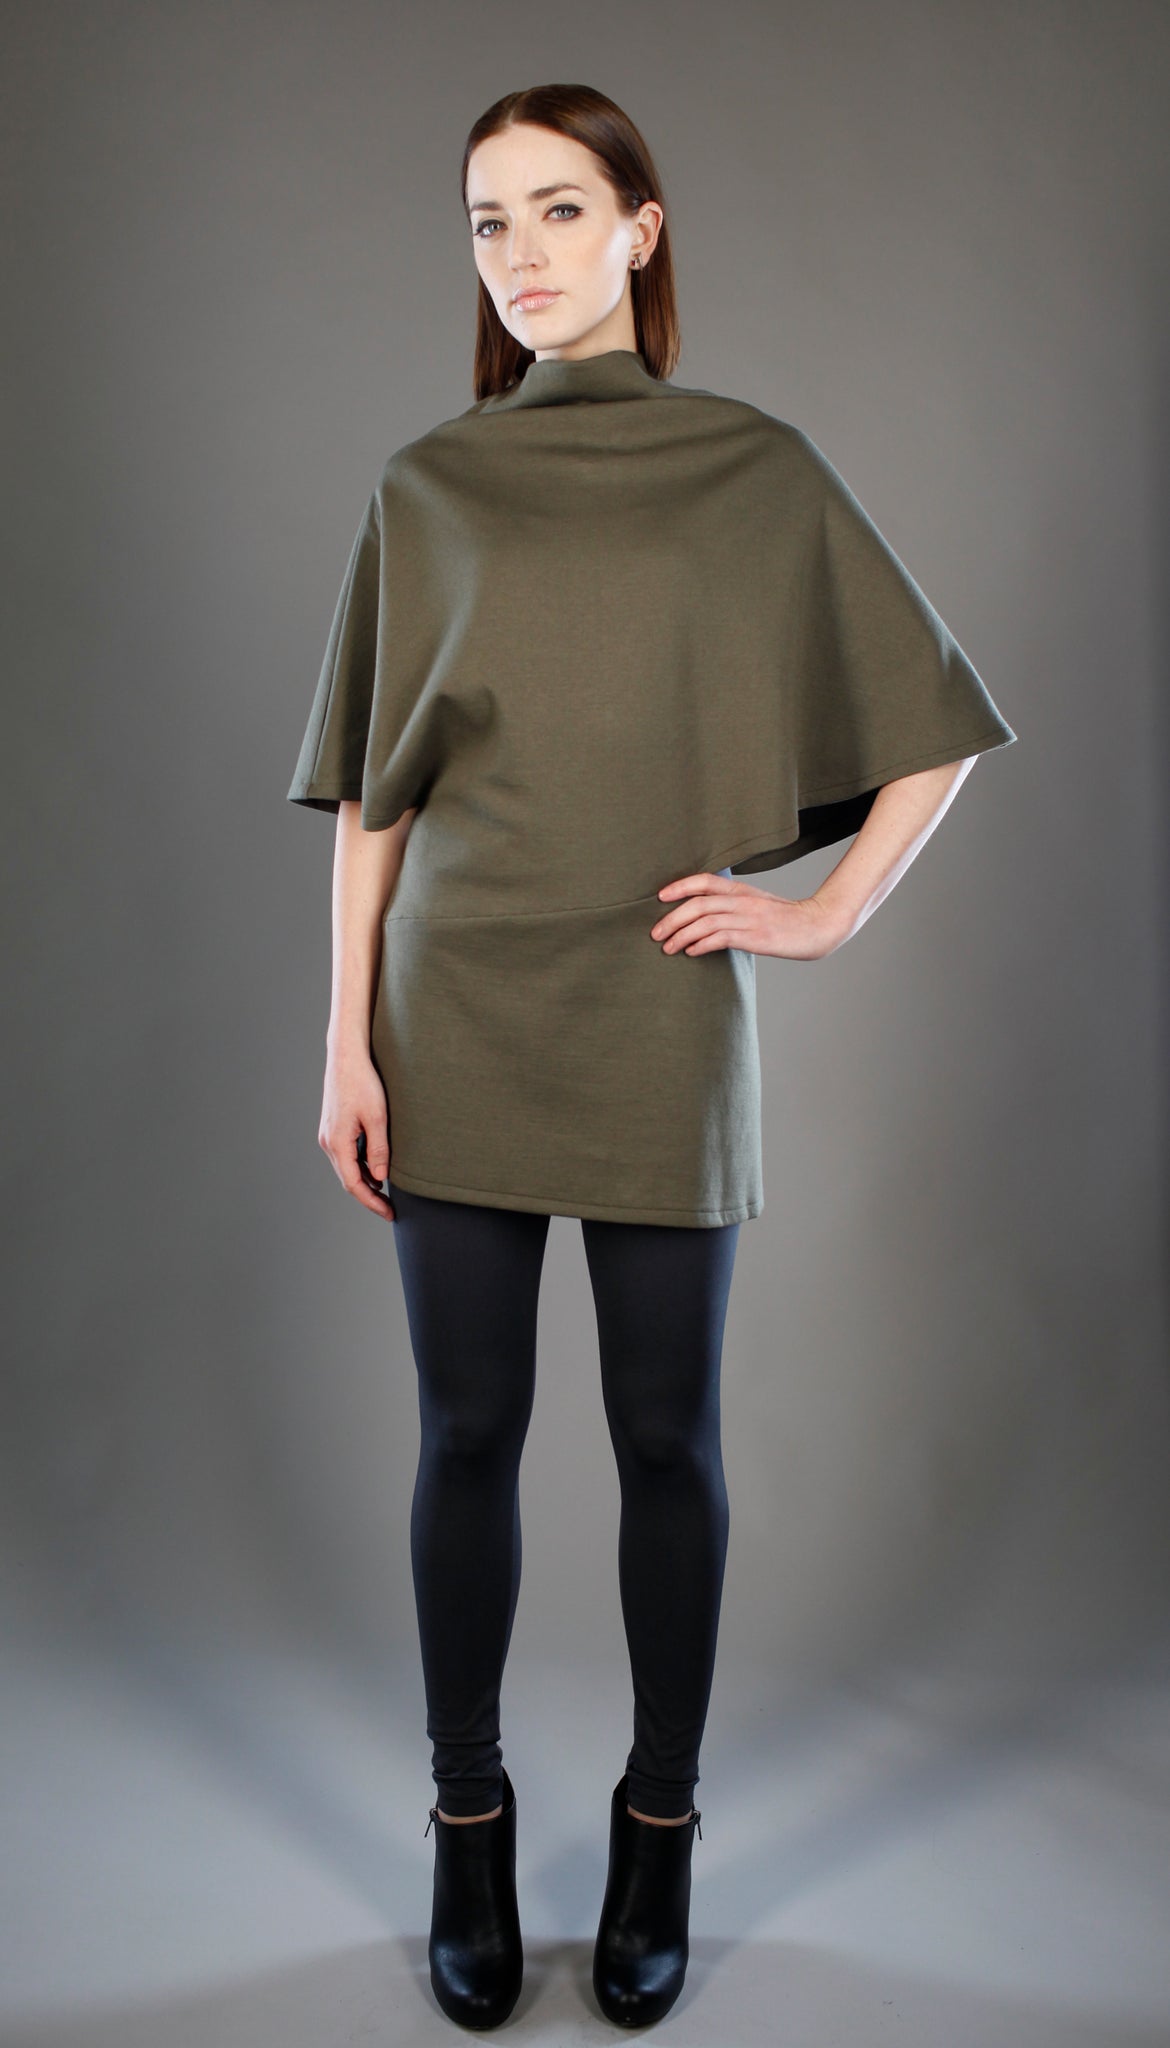 Poncho Tunic Top in Olive